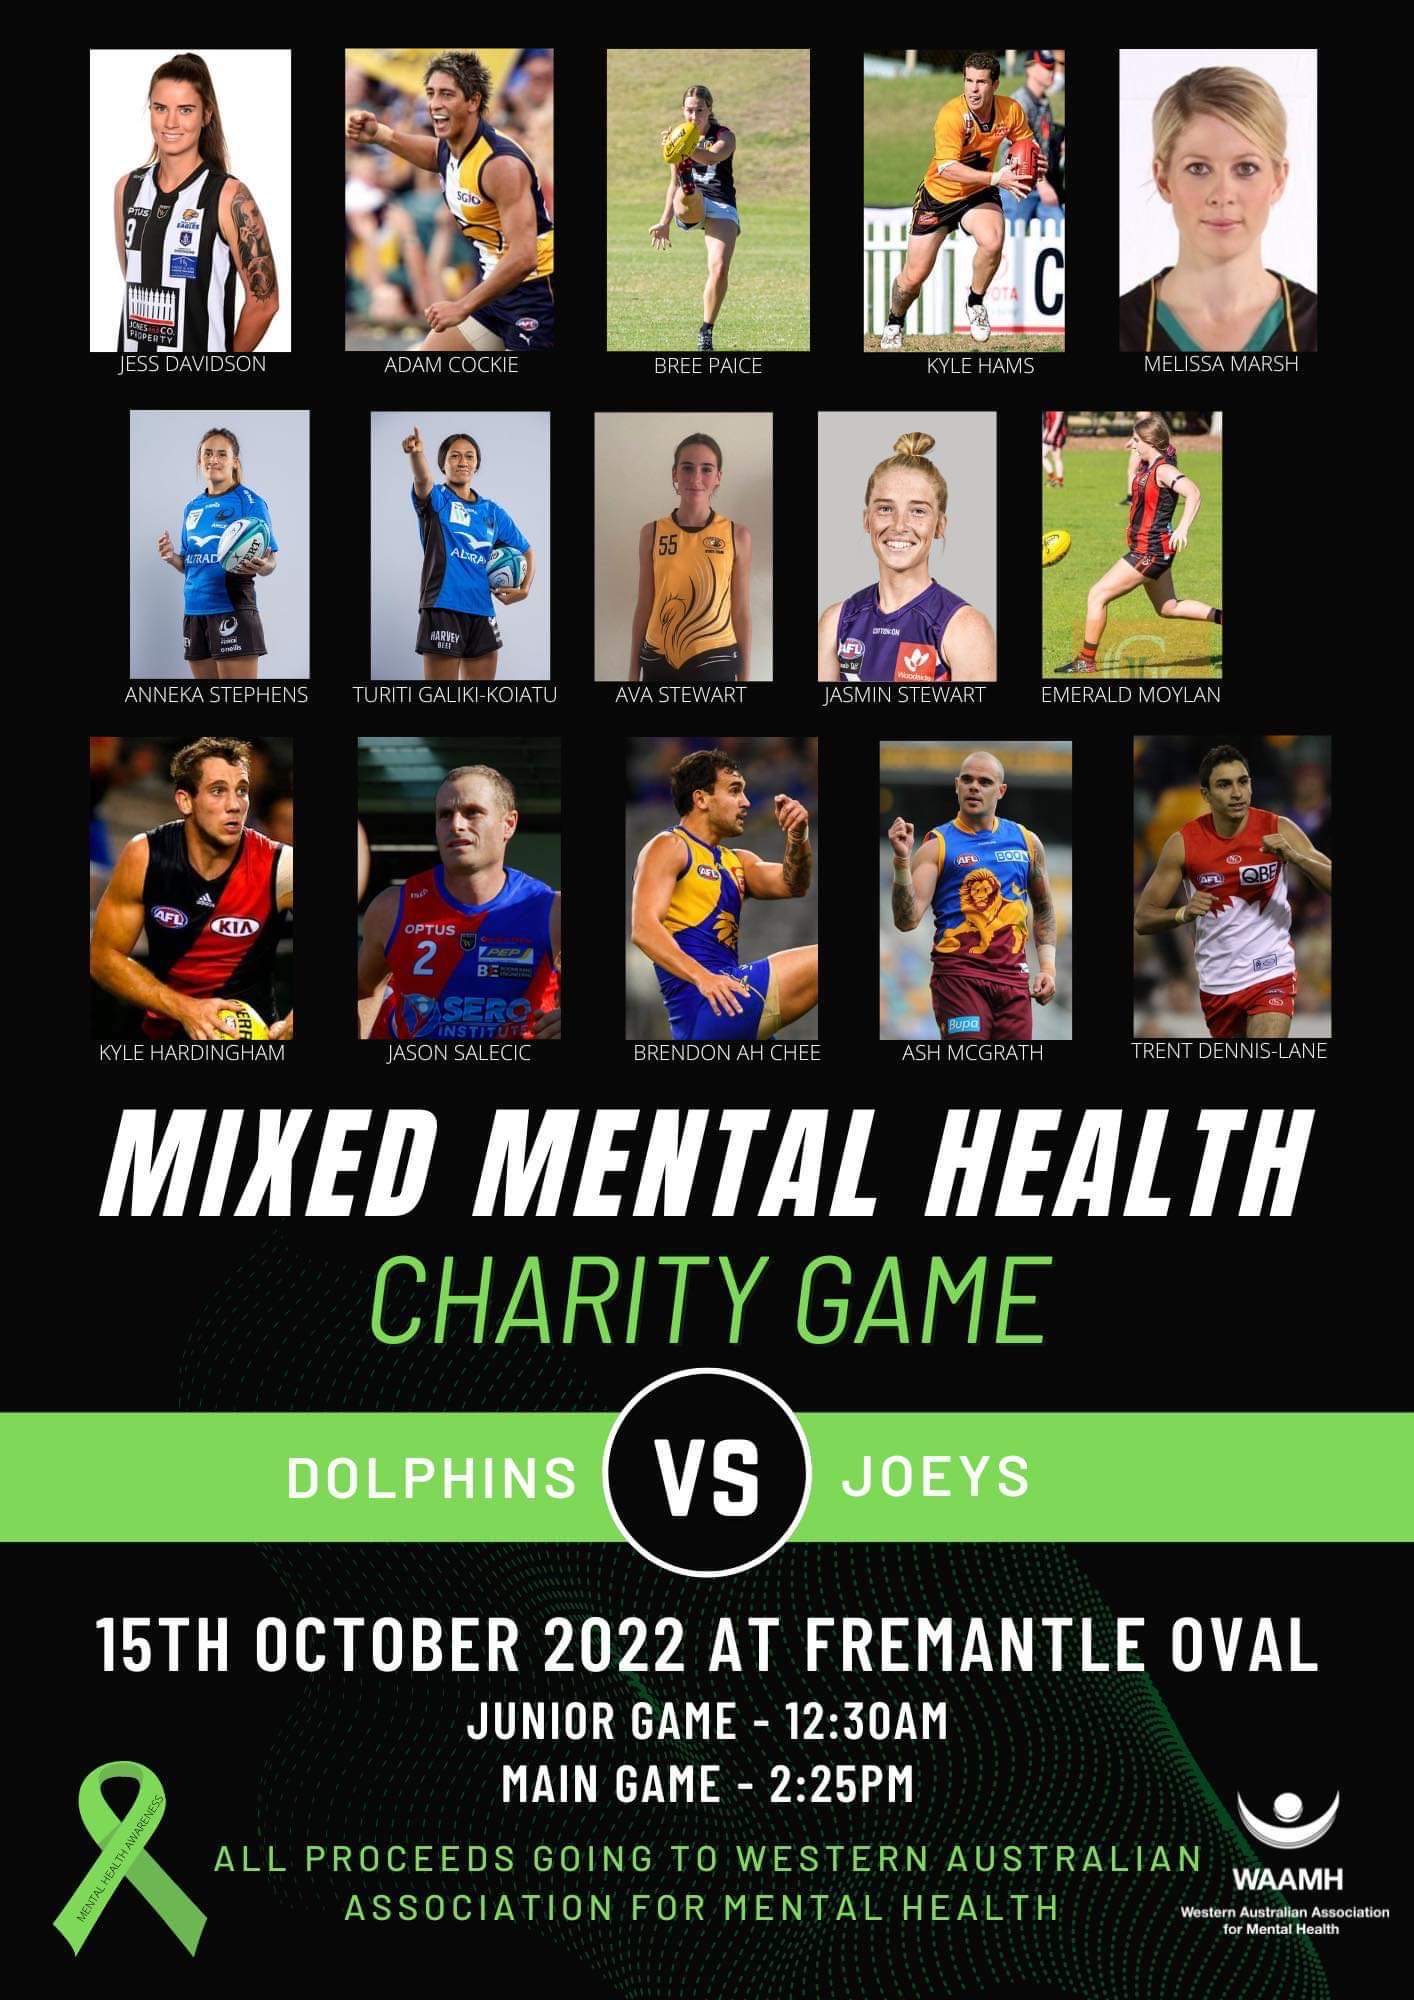 Mixed Mental Health Charity AFL game